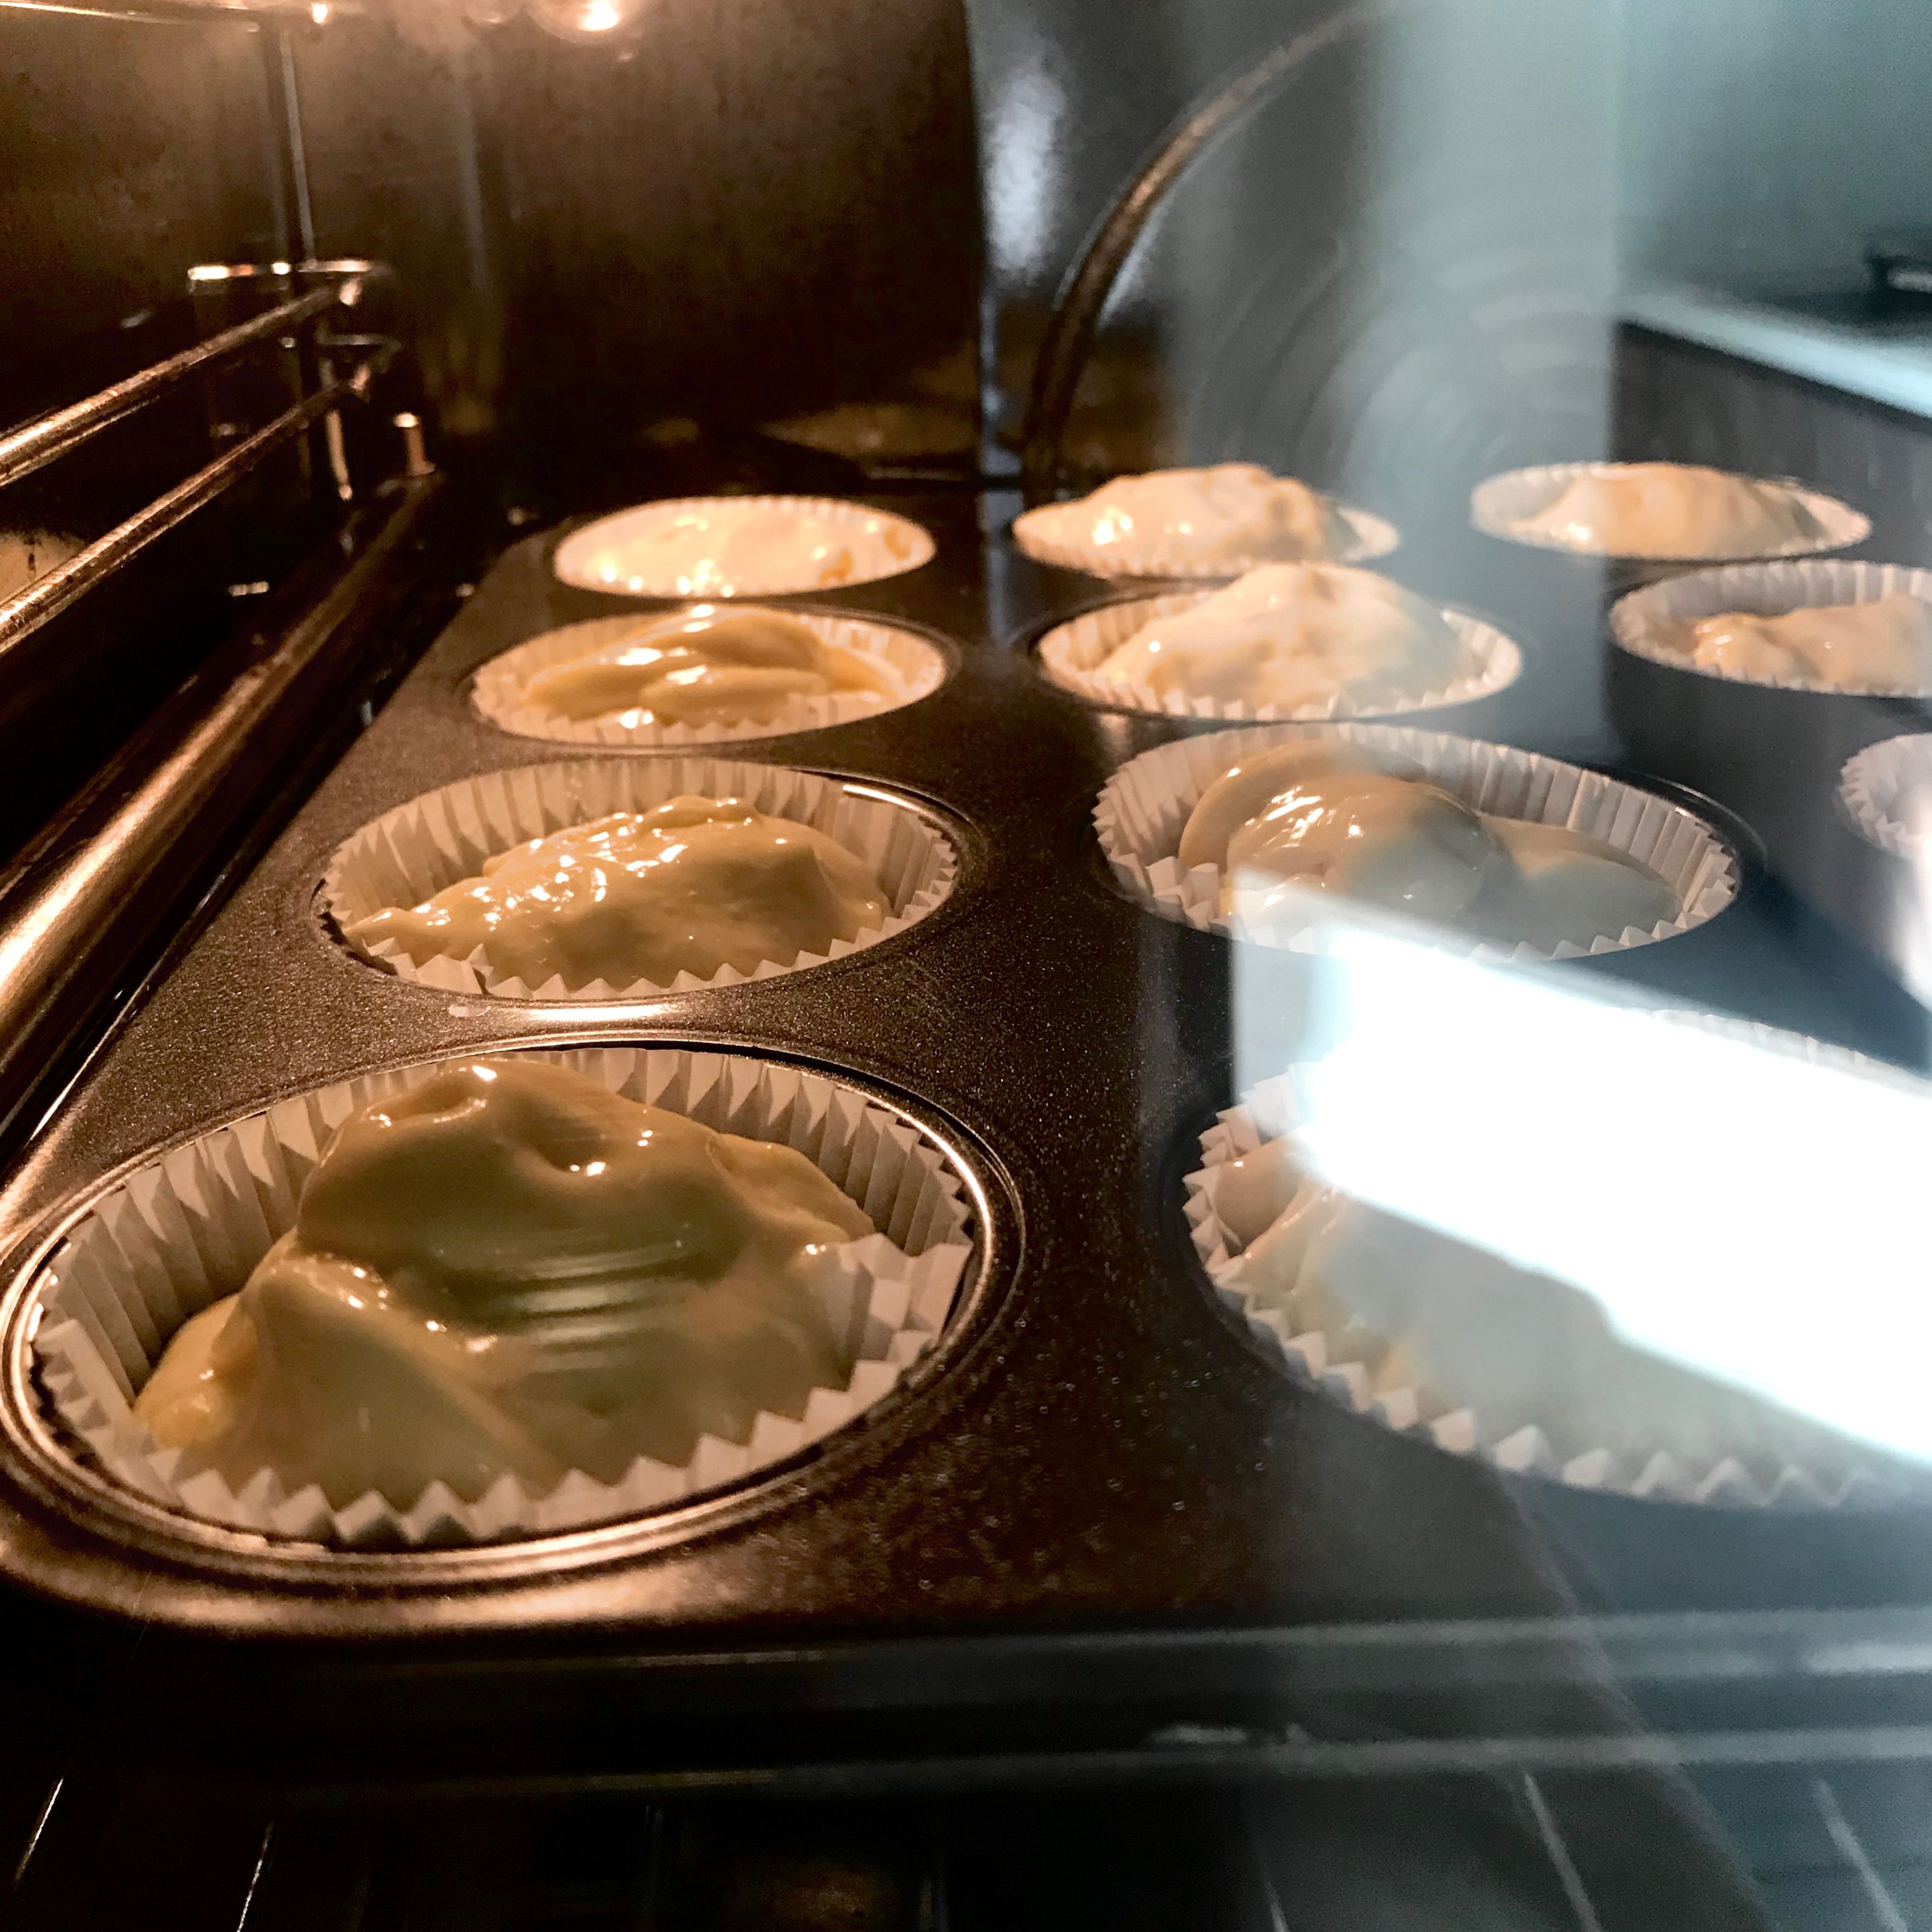 Bake your cupcakes at 180°C for 20 minutes and done! Enjoy!